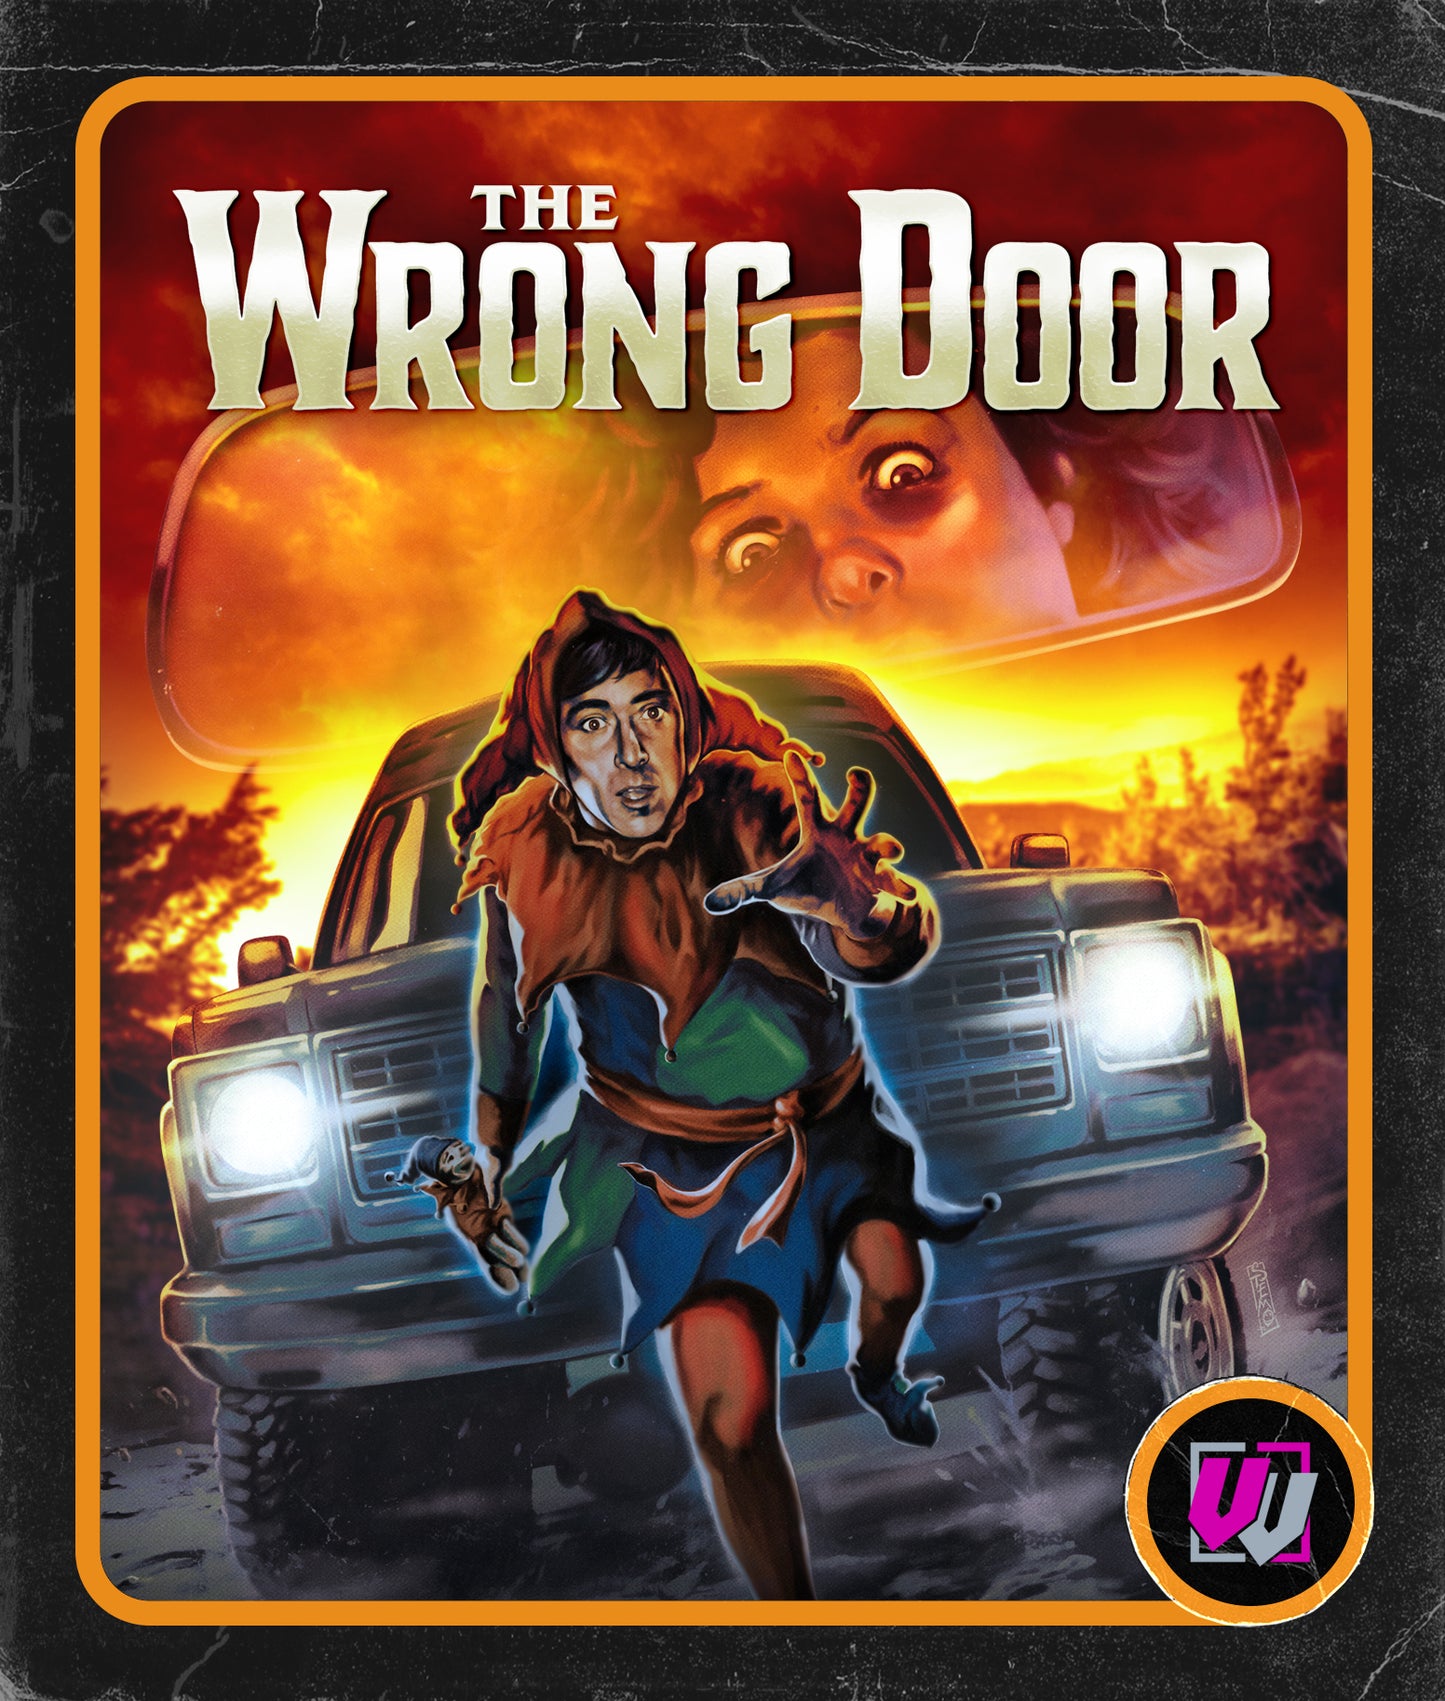 The Wrong Door Limited Edition Visual Vengeance Blu-Ray [PRE-ORDER] [SLIPCOVER]